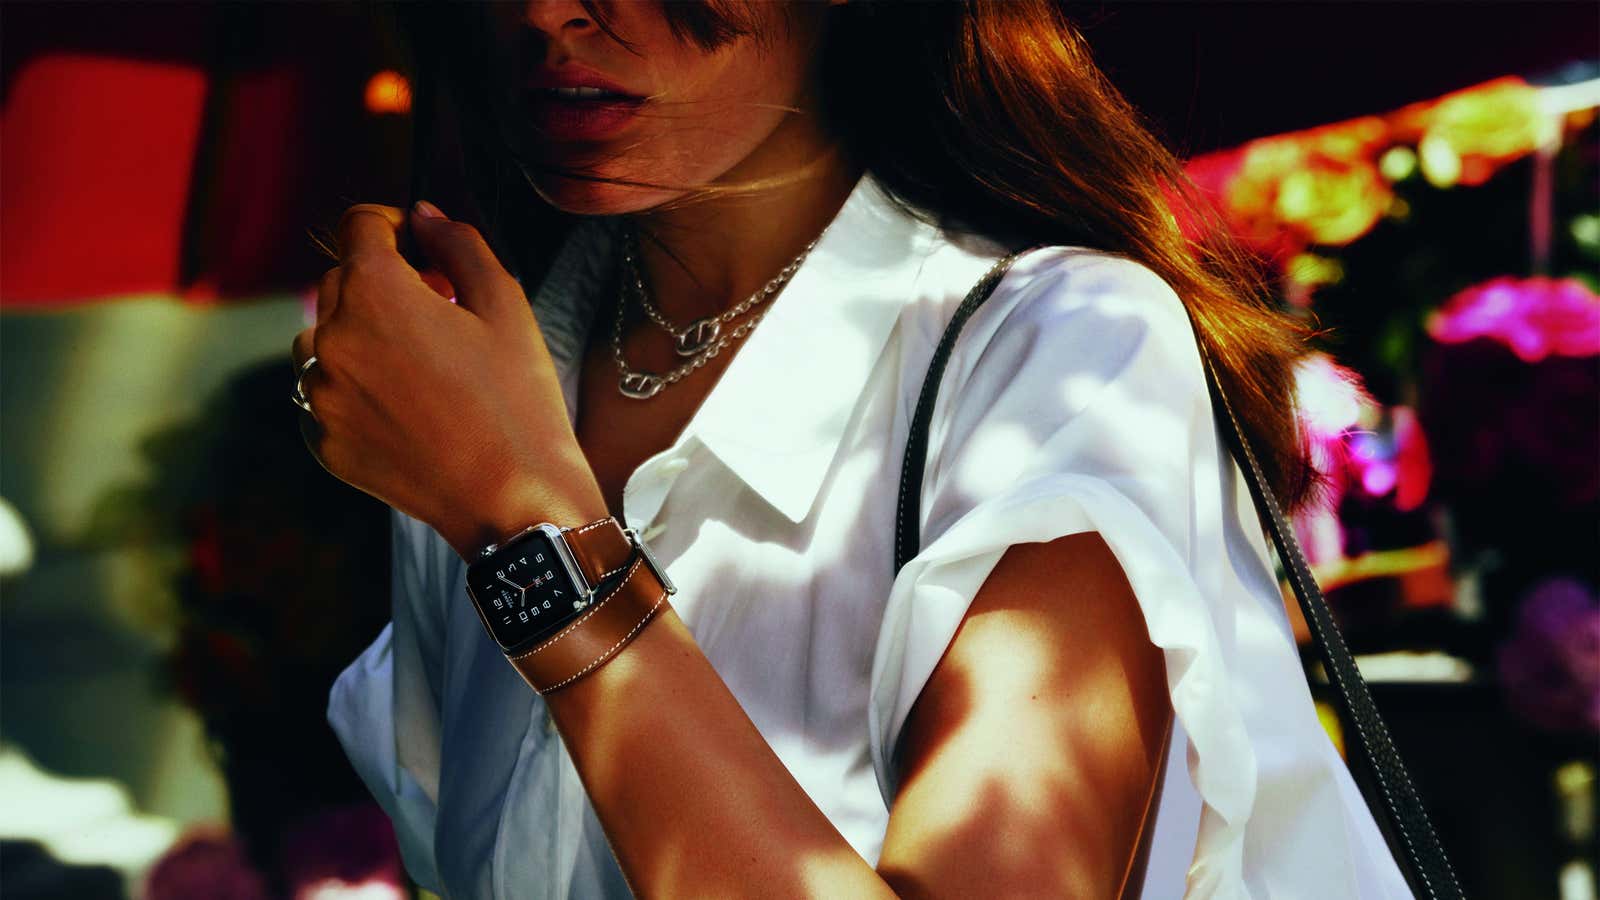 The Apple Watch Hermès Double Tour, which owes its existence to a reclusive Belgian guy who happens to be one of the most influential fashion designers of the last 20 years.